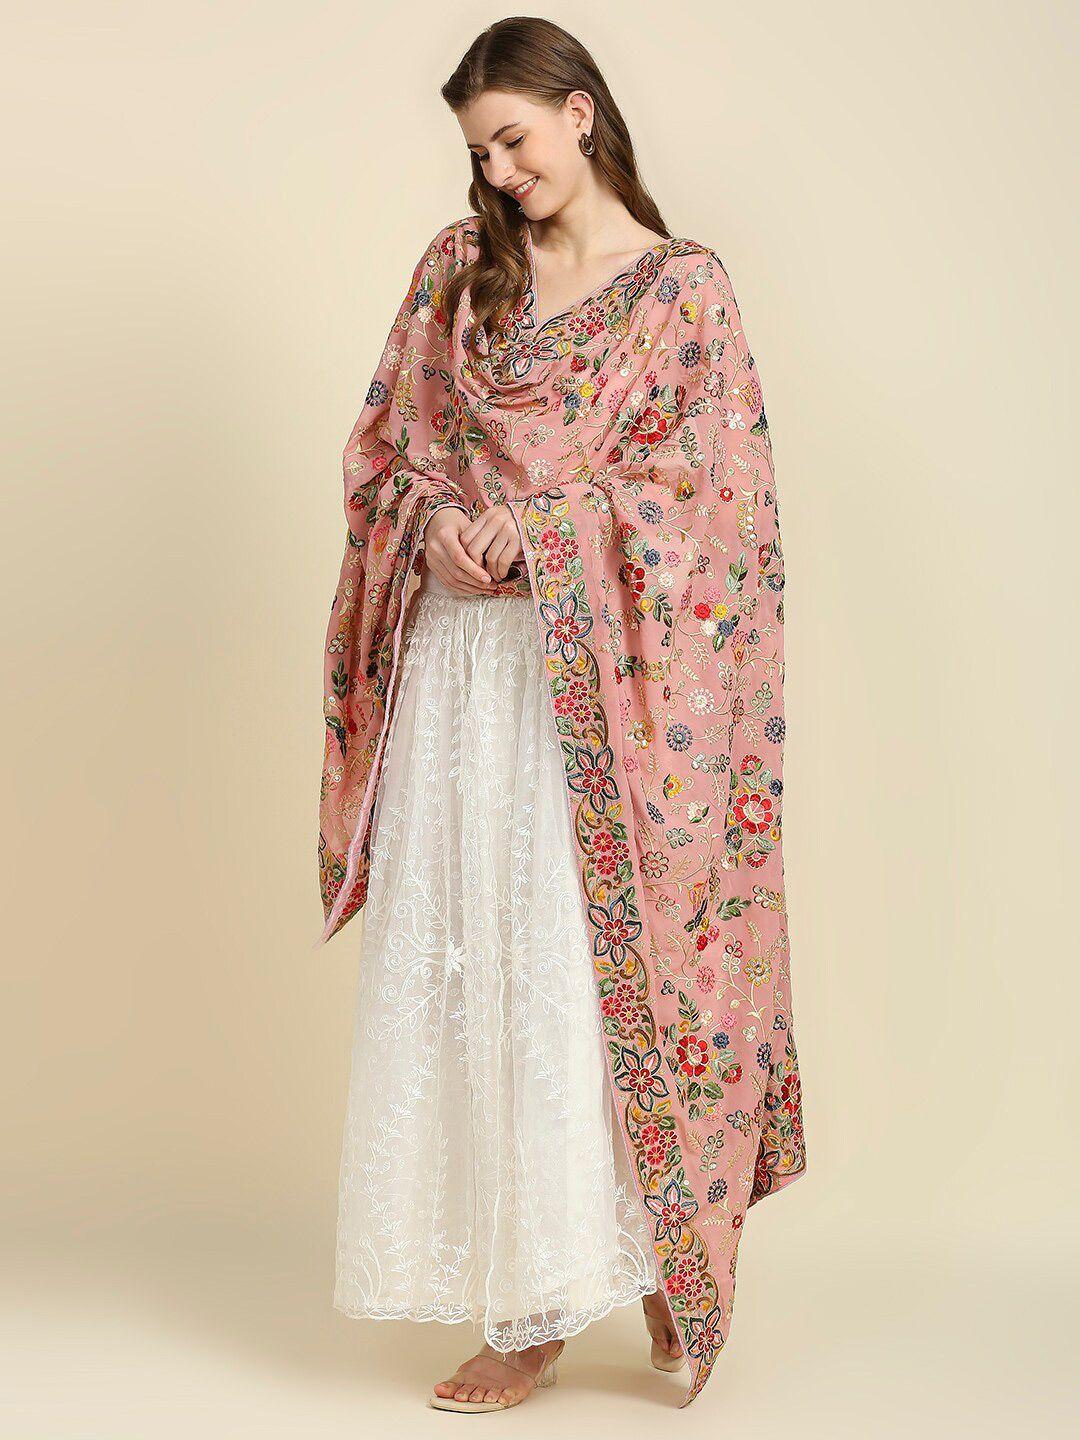 dupatta-bazaar-pink-&-blue-floral-embroidered-georgette-dupatta-with-sequinned